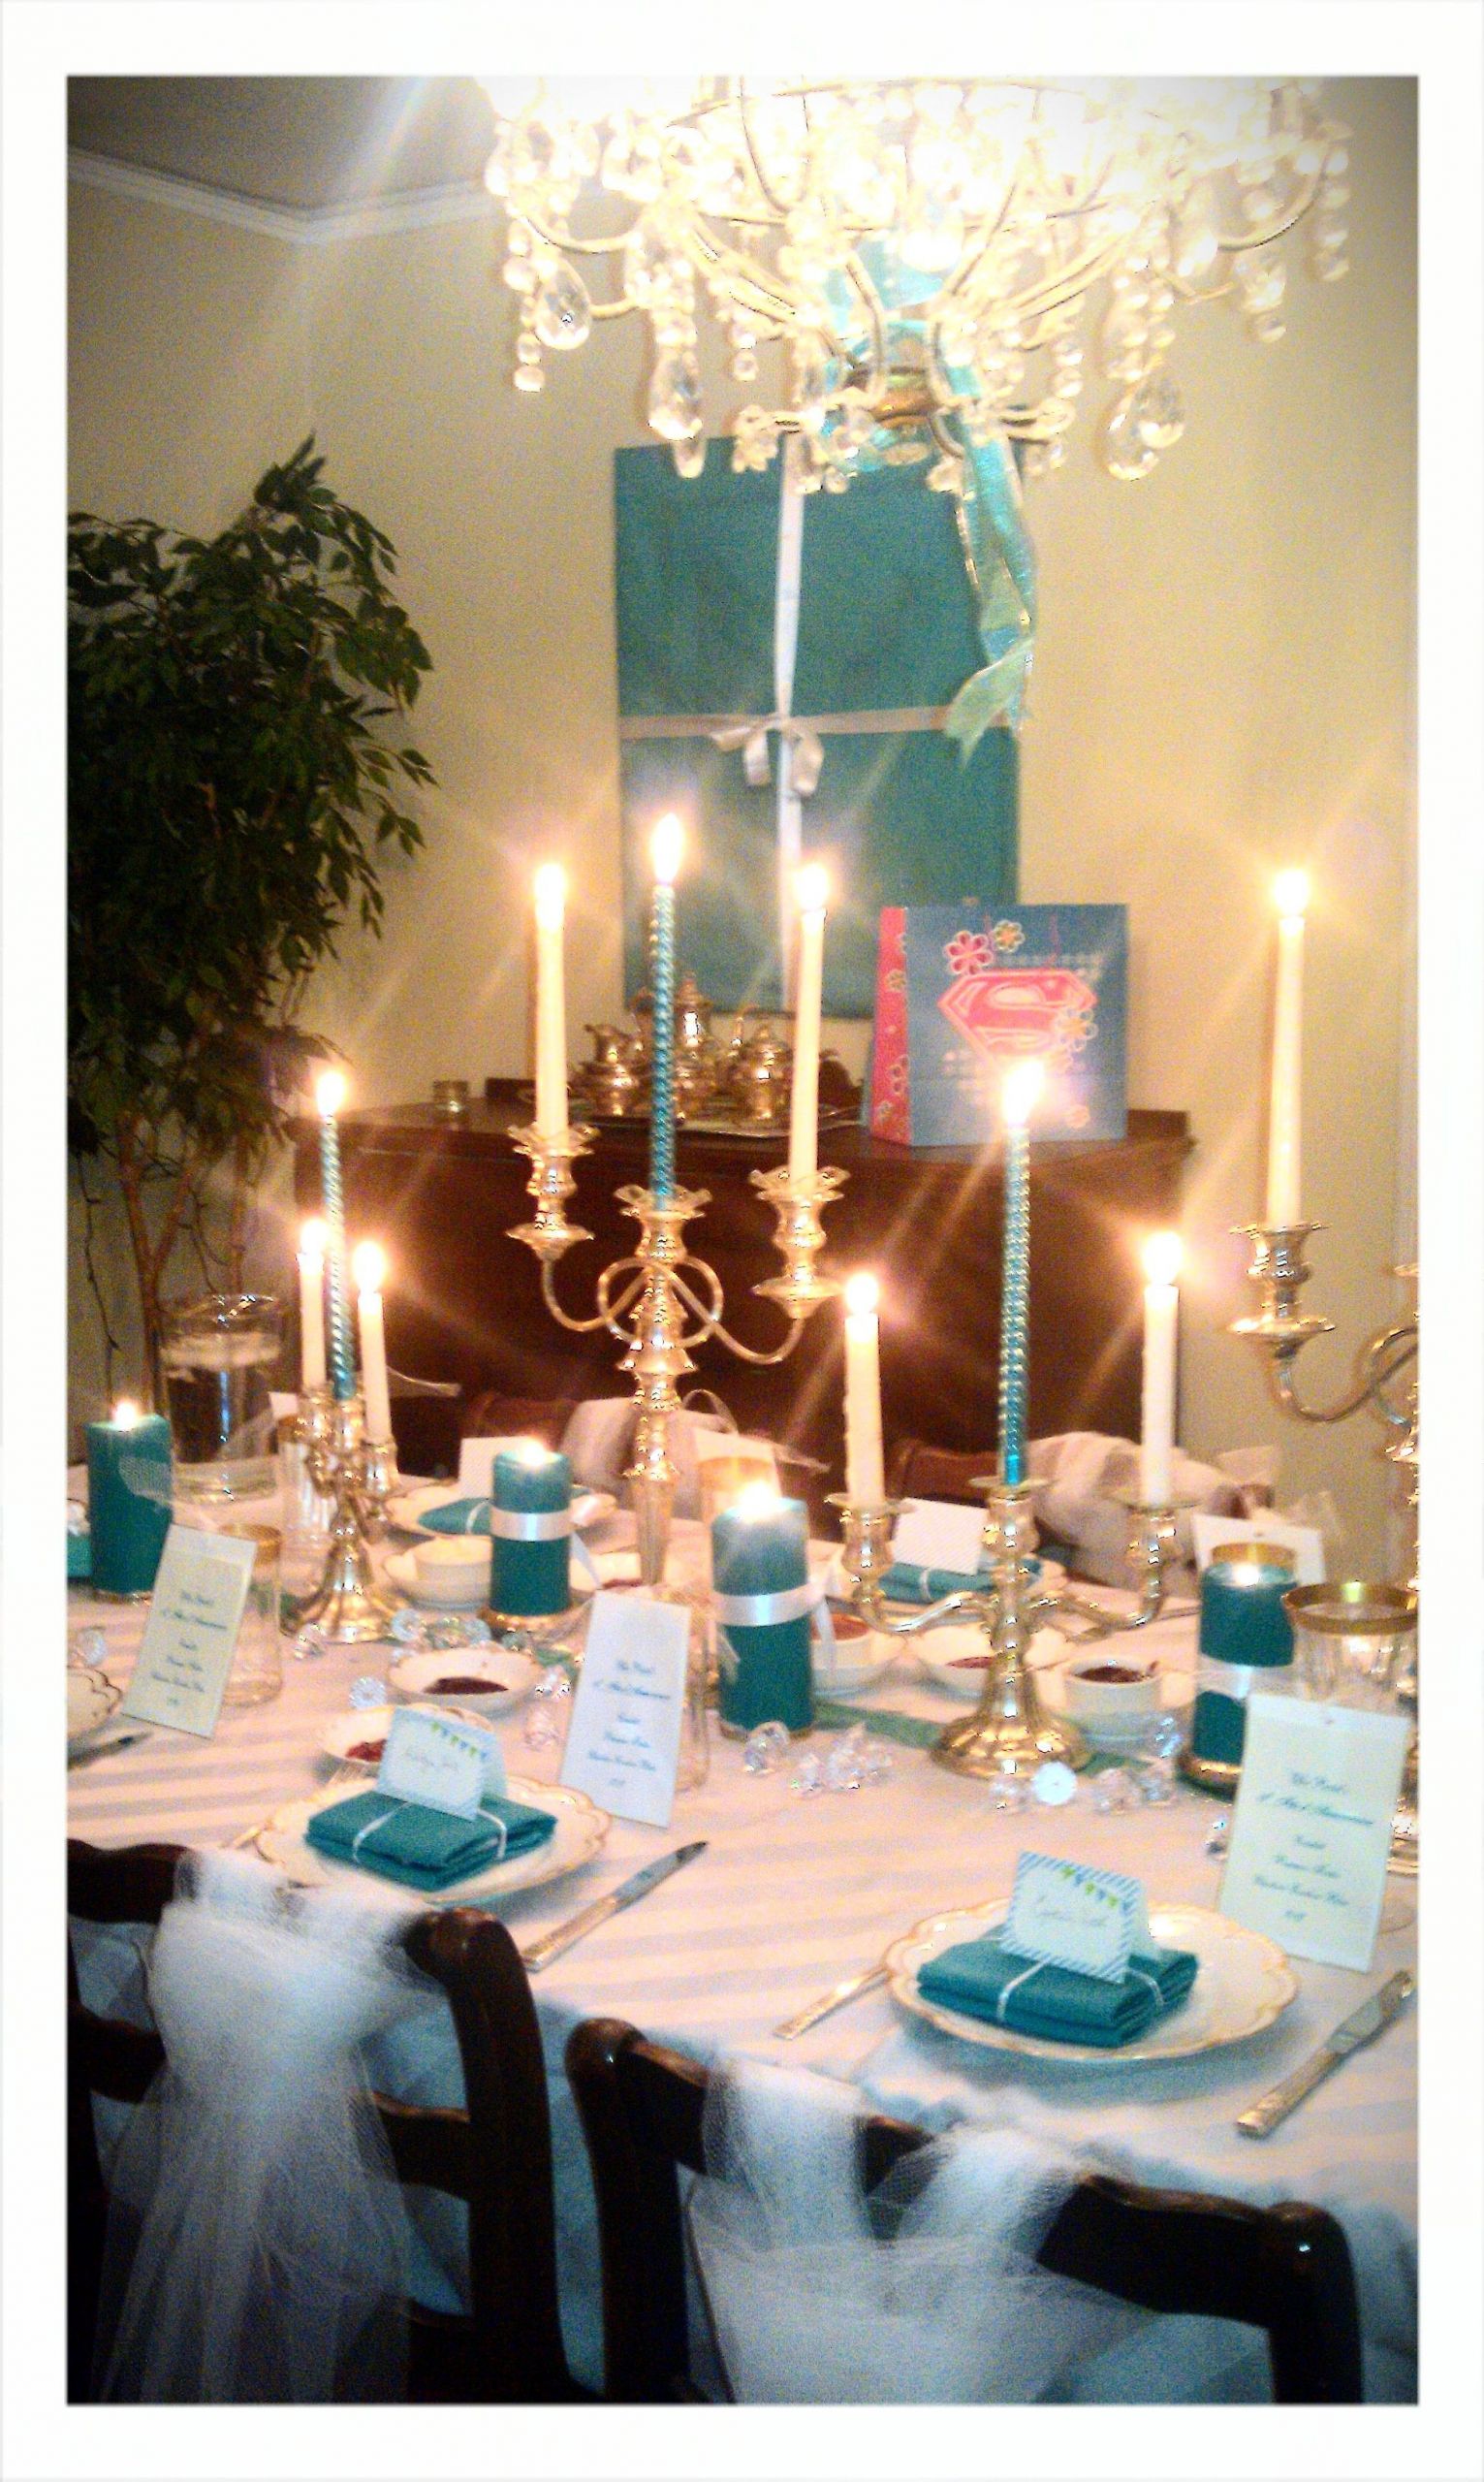 Sweet 16 Dinner Party Ideas
 Tiffany dinner party party ideas Pinterest